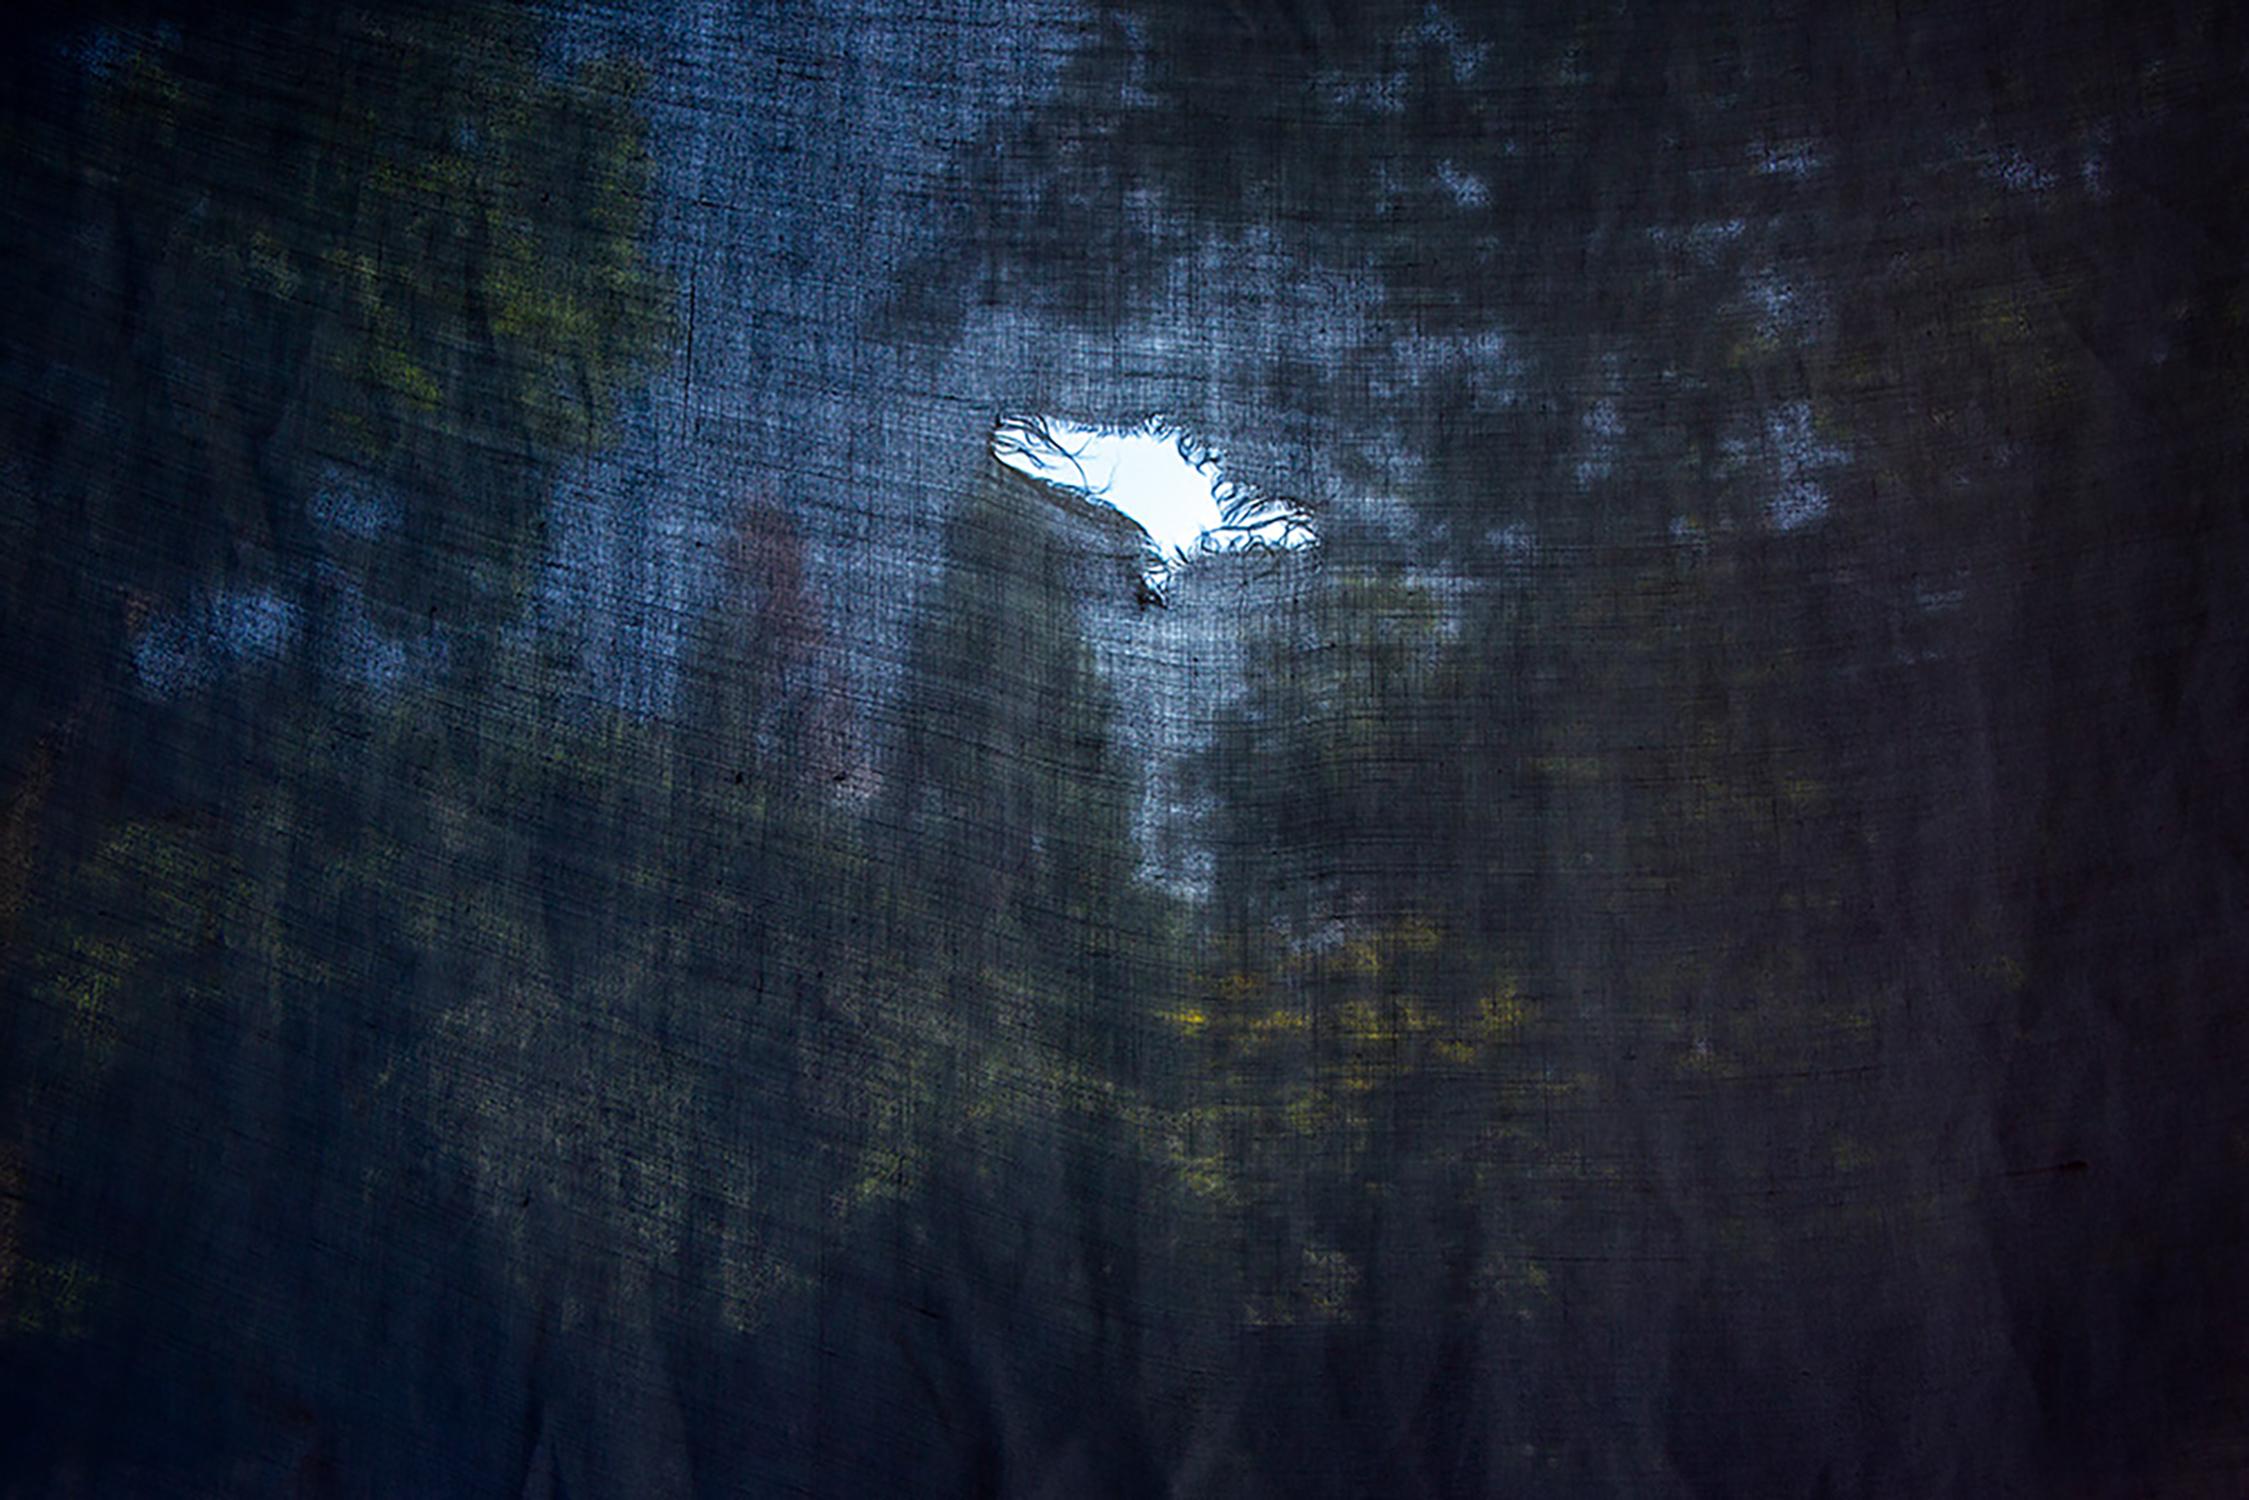 Shannon Davis Color Photograph - "Peek" - Southern, landscape, staged photography, abstract, blue, trees